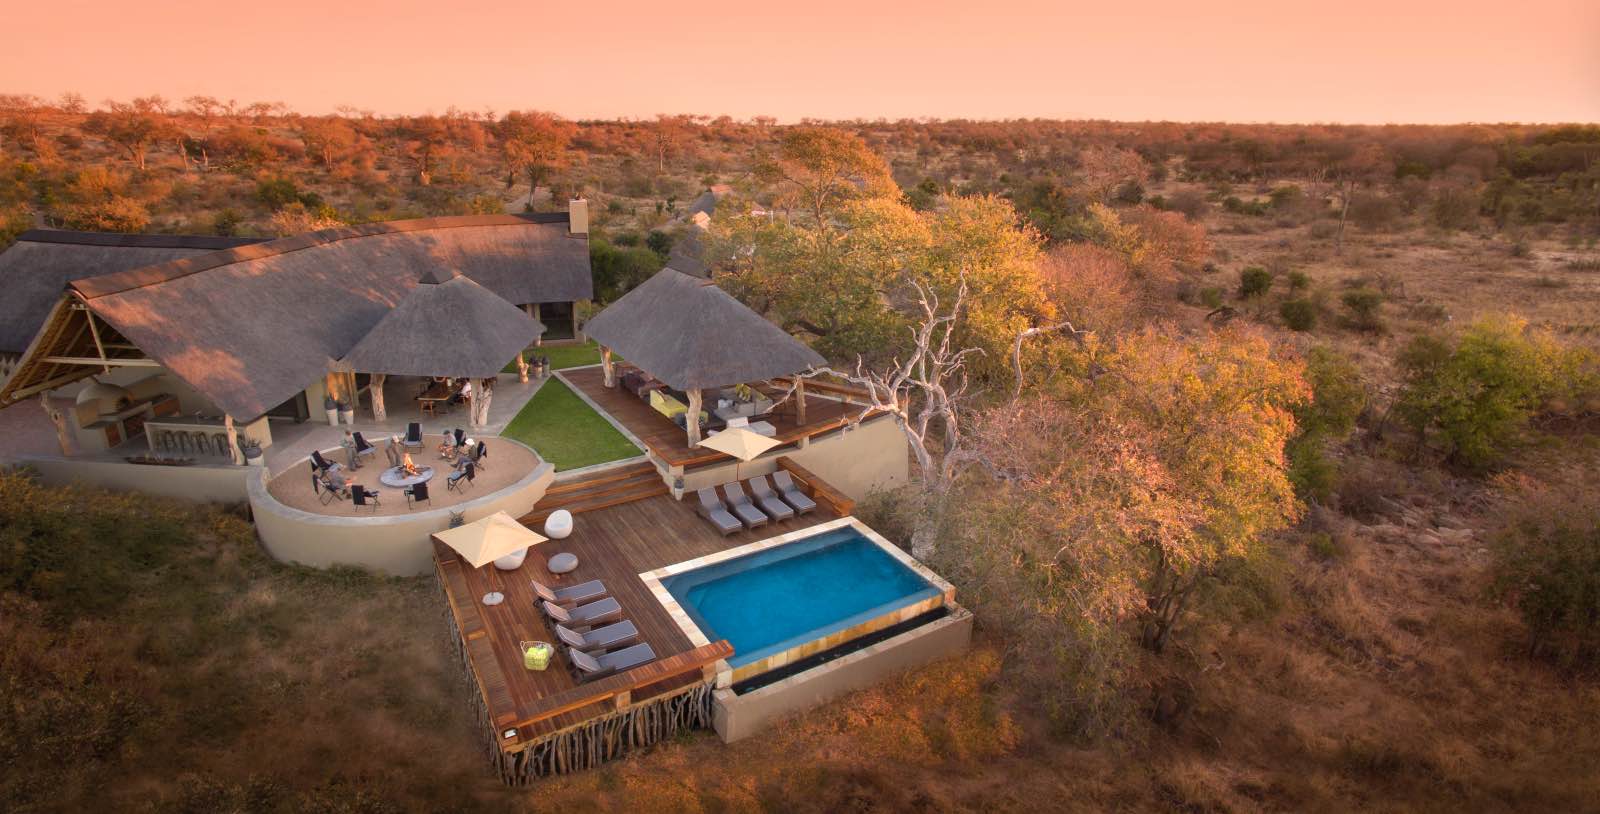 Rockfig from the air looking down on the pool, boma, and main lodge under thatch